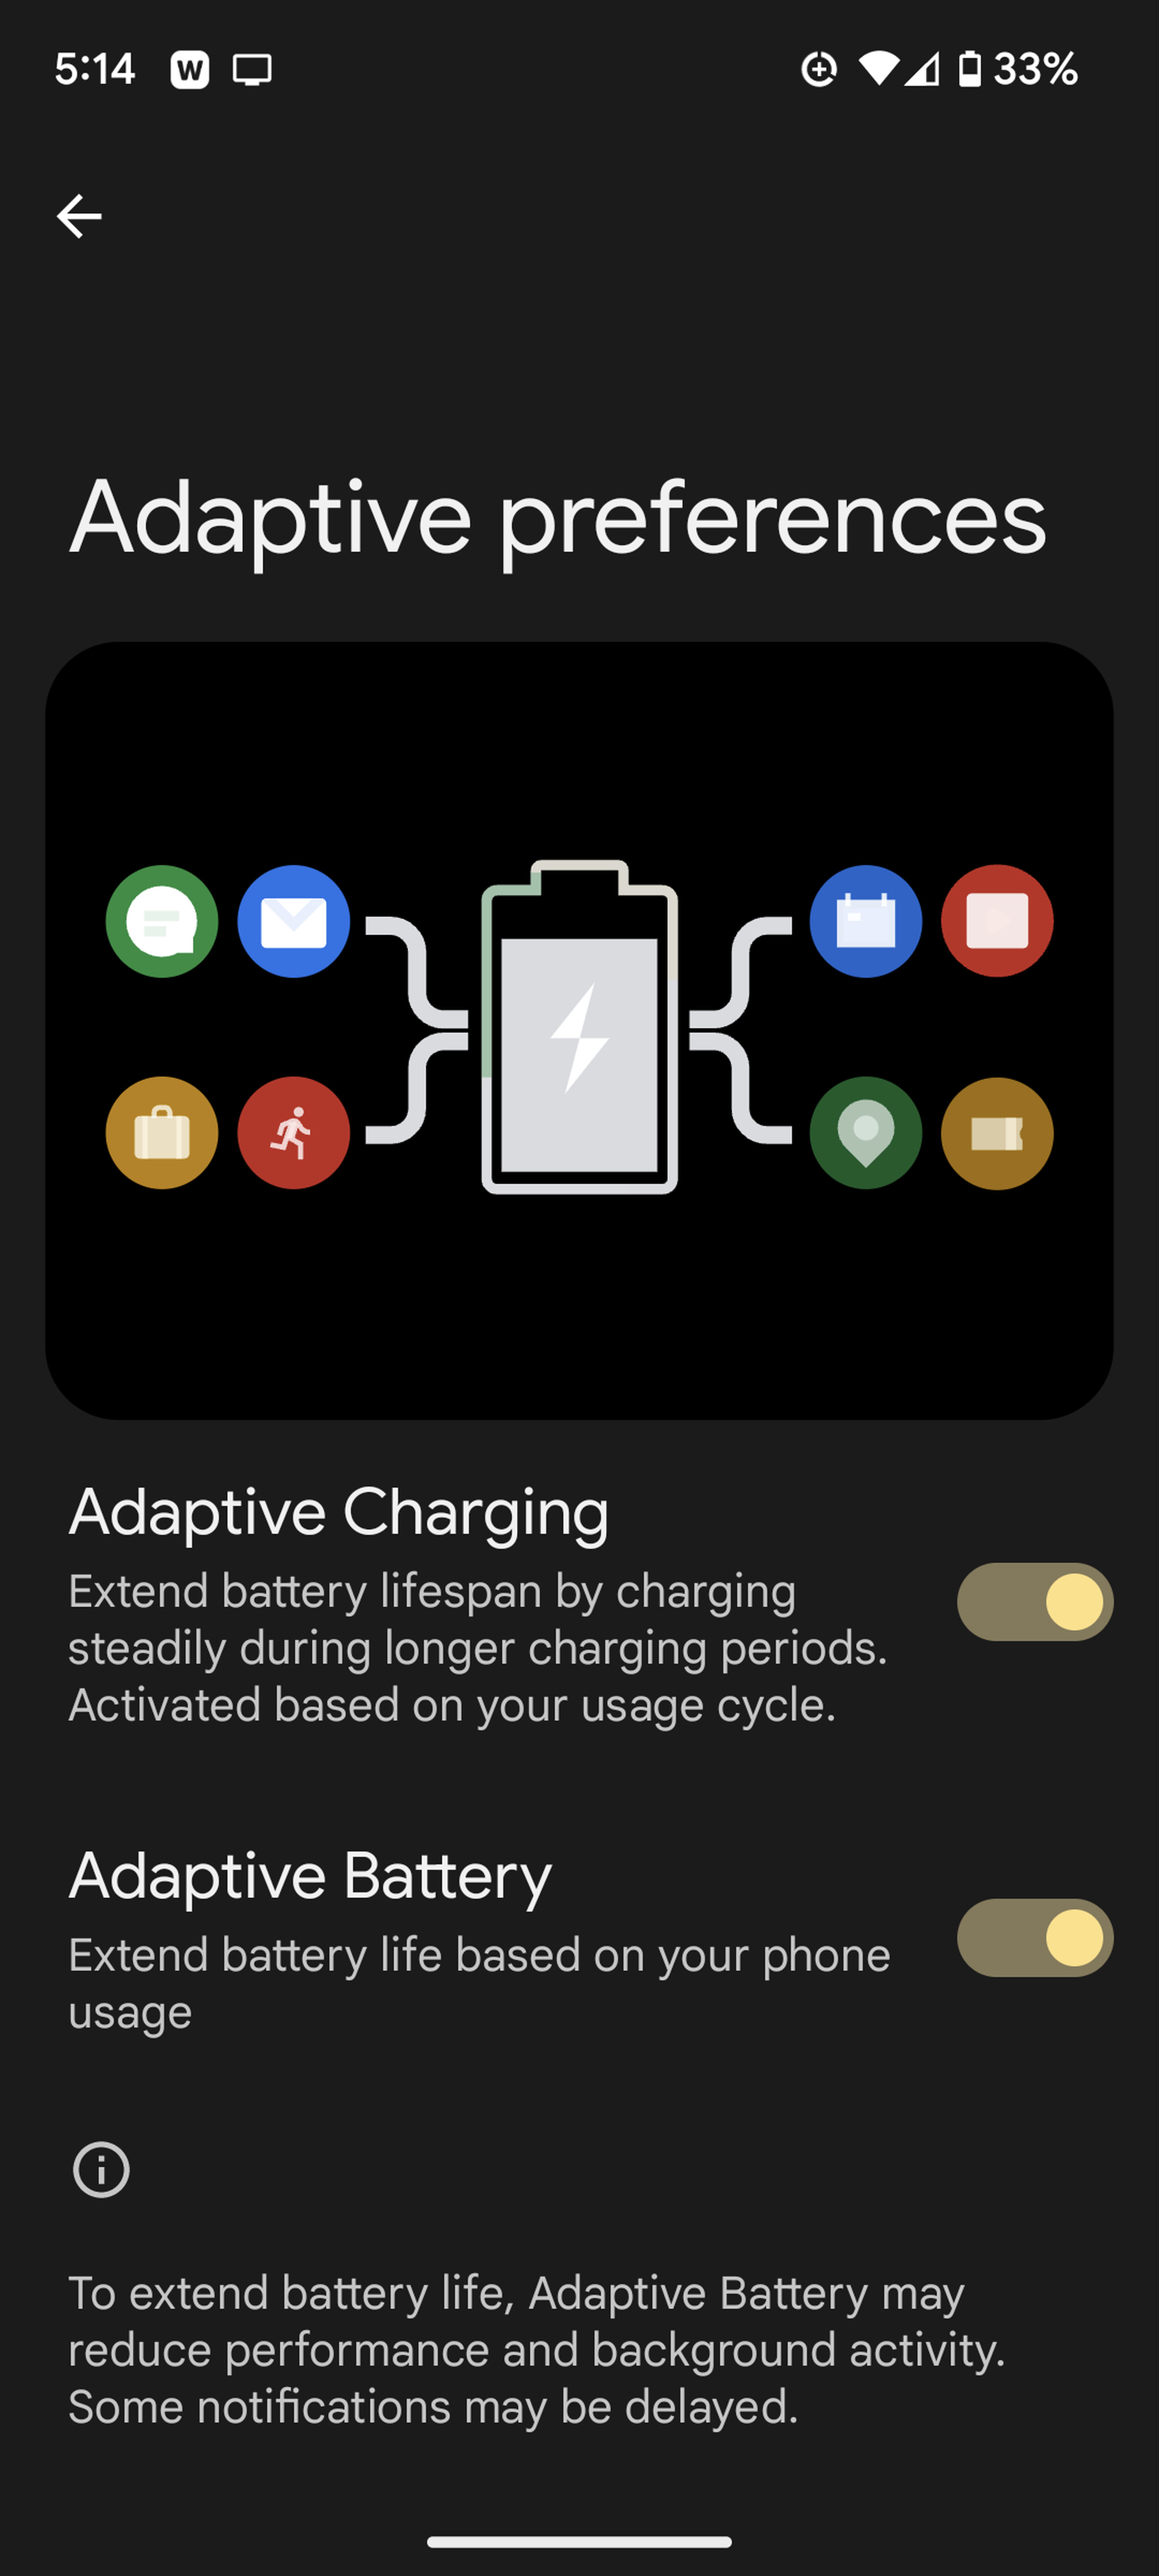 Dark screen with Adaptive preferences on top, a graphic of a battery beneath, and toggled choices for adaptive charging and adaptive battery beneath that.